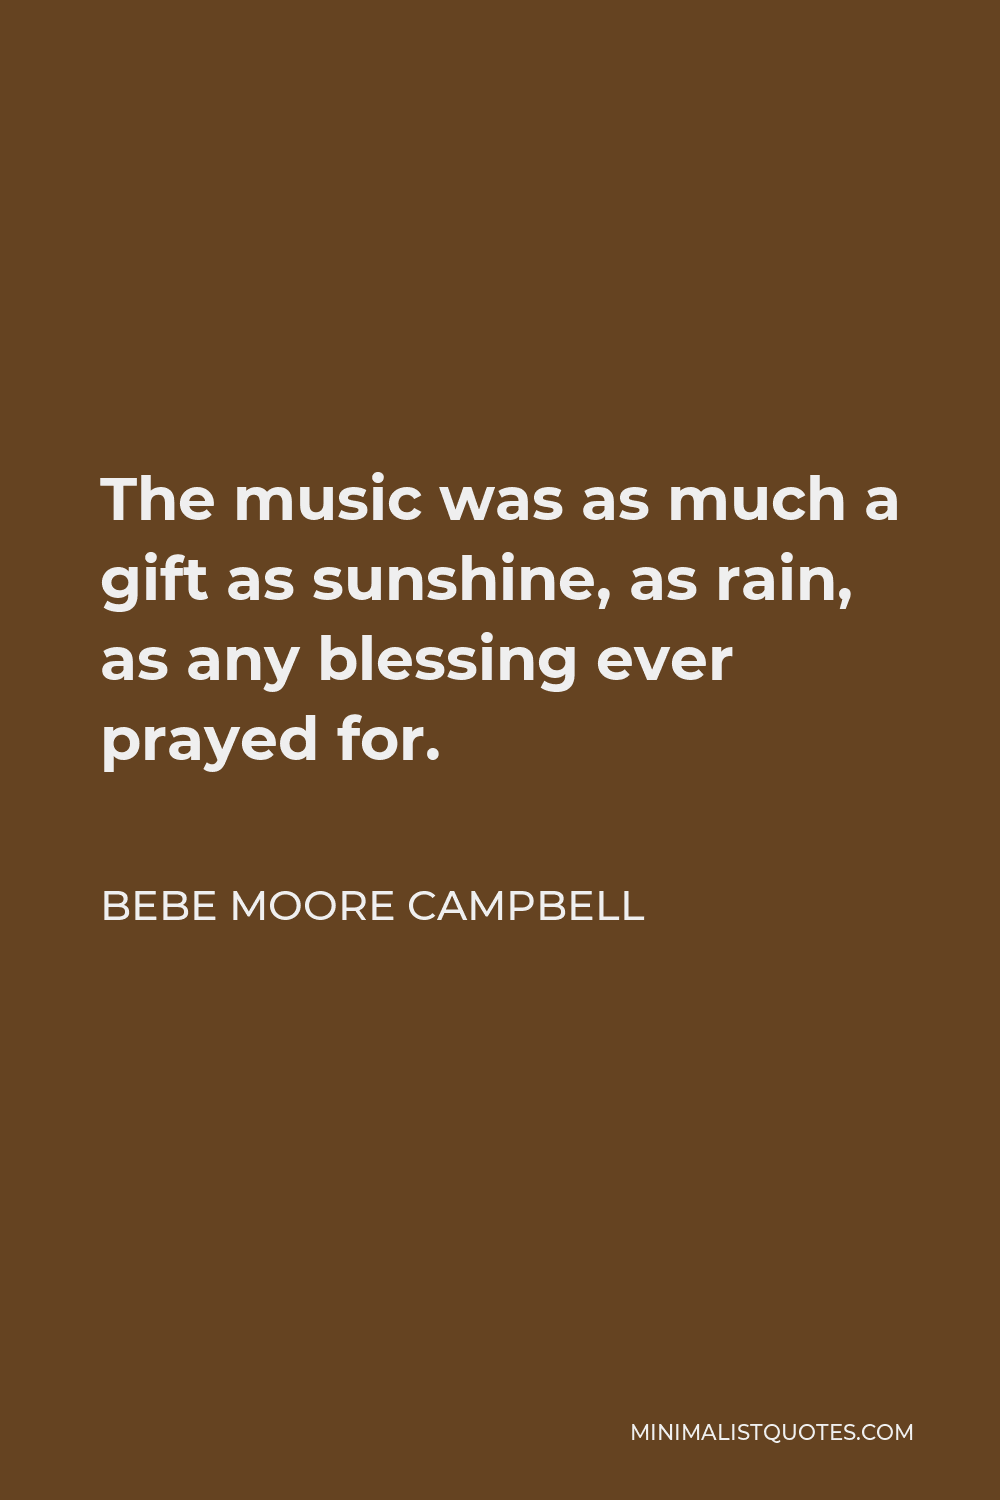 Bebe Moore Campbell Quote - The music was as much a gift as sunshine, as rain, as any blessing ever prayed for.